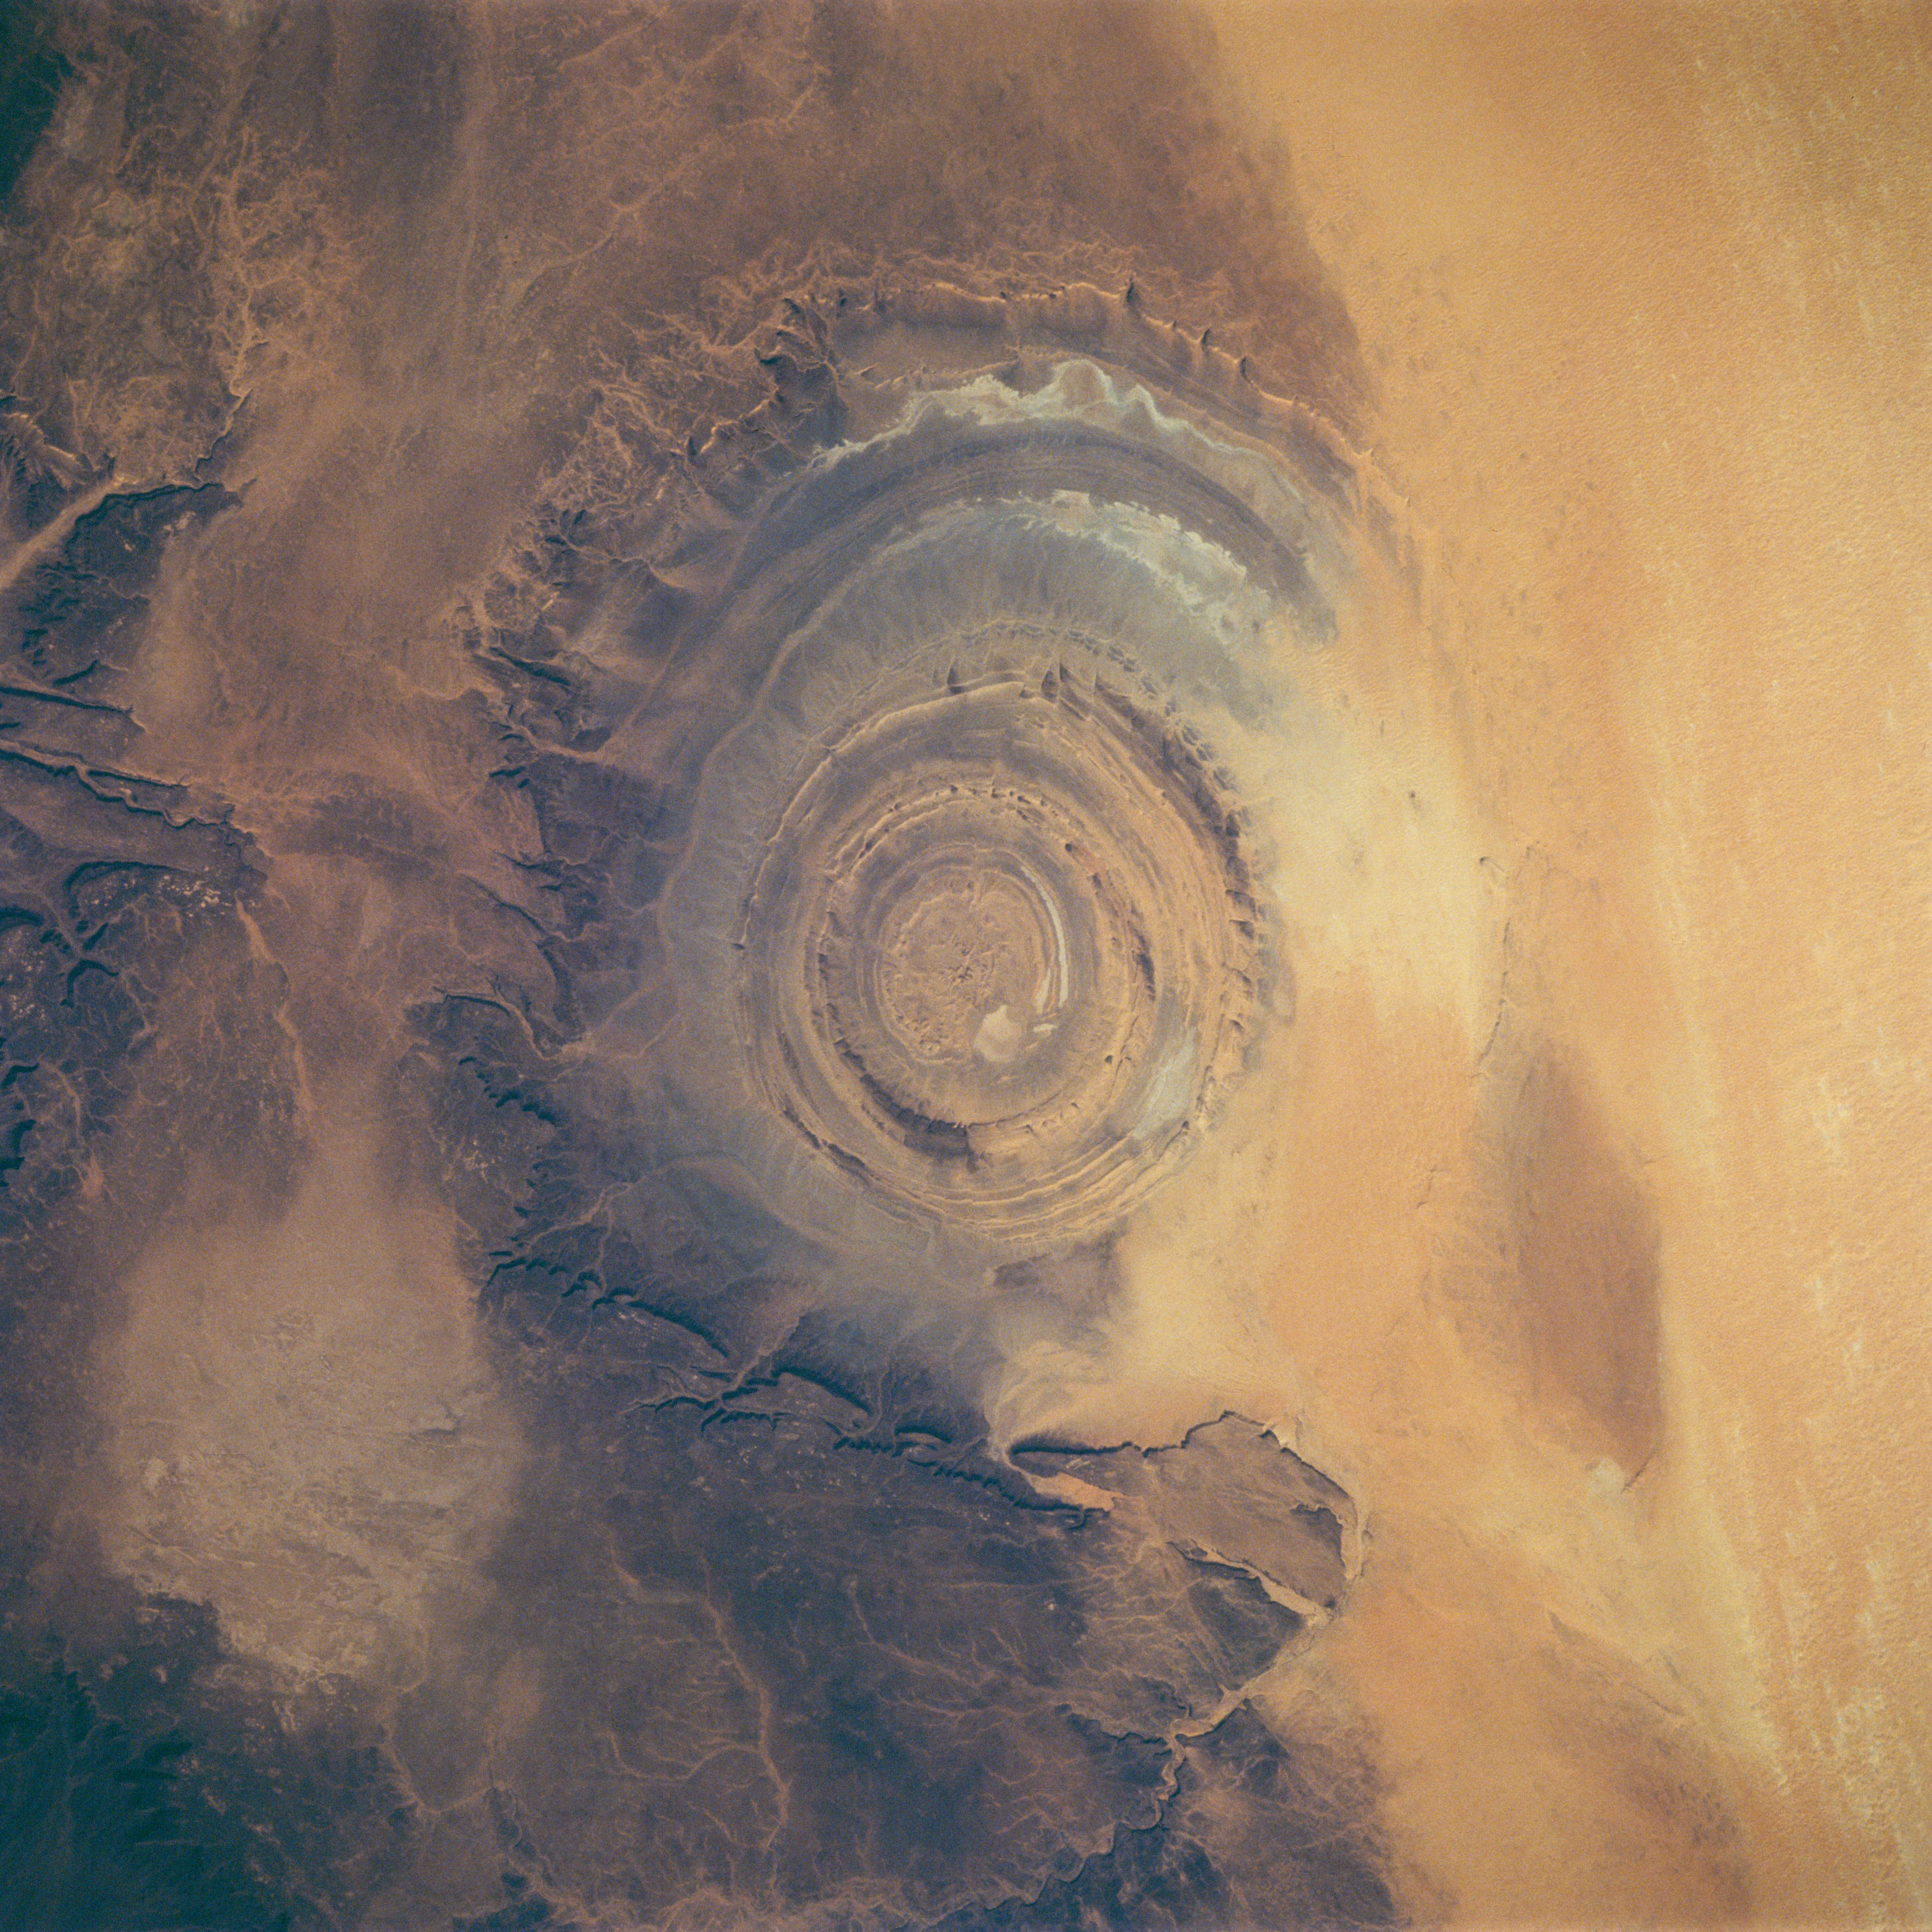 Earth observation photographs taken by the STS-58 crew. The Richat Structure in Mauritania